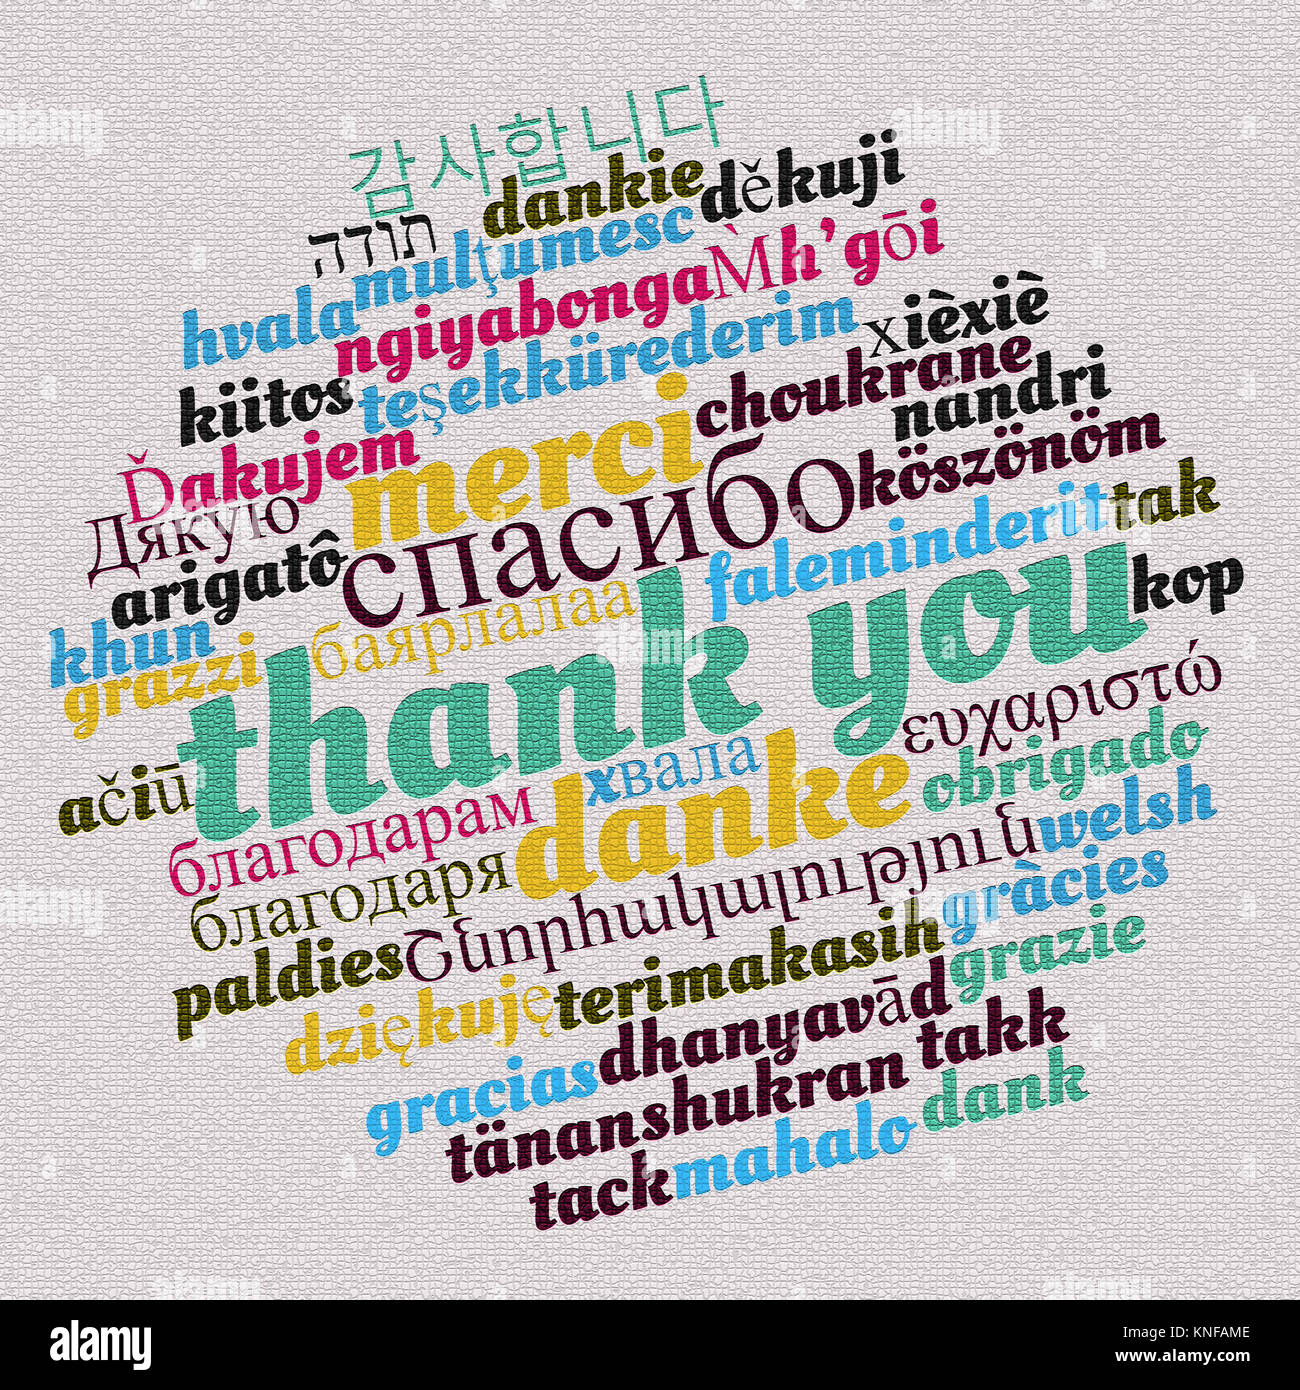 Thank you word cloud concept in different languages Stock Photo